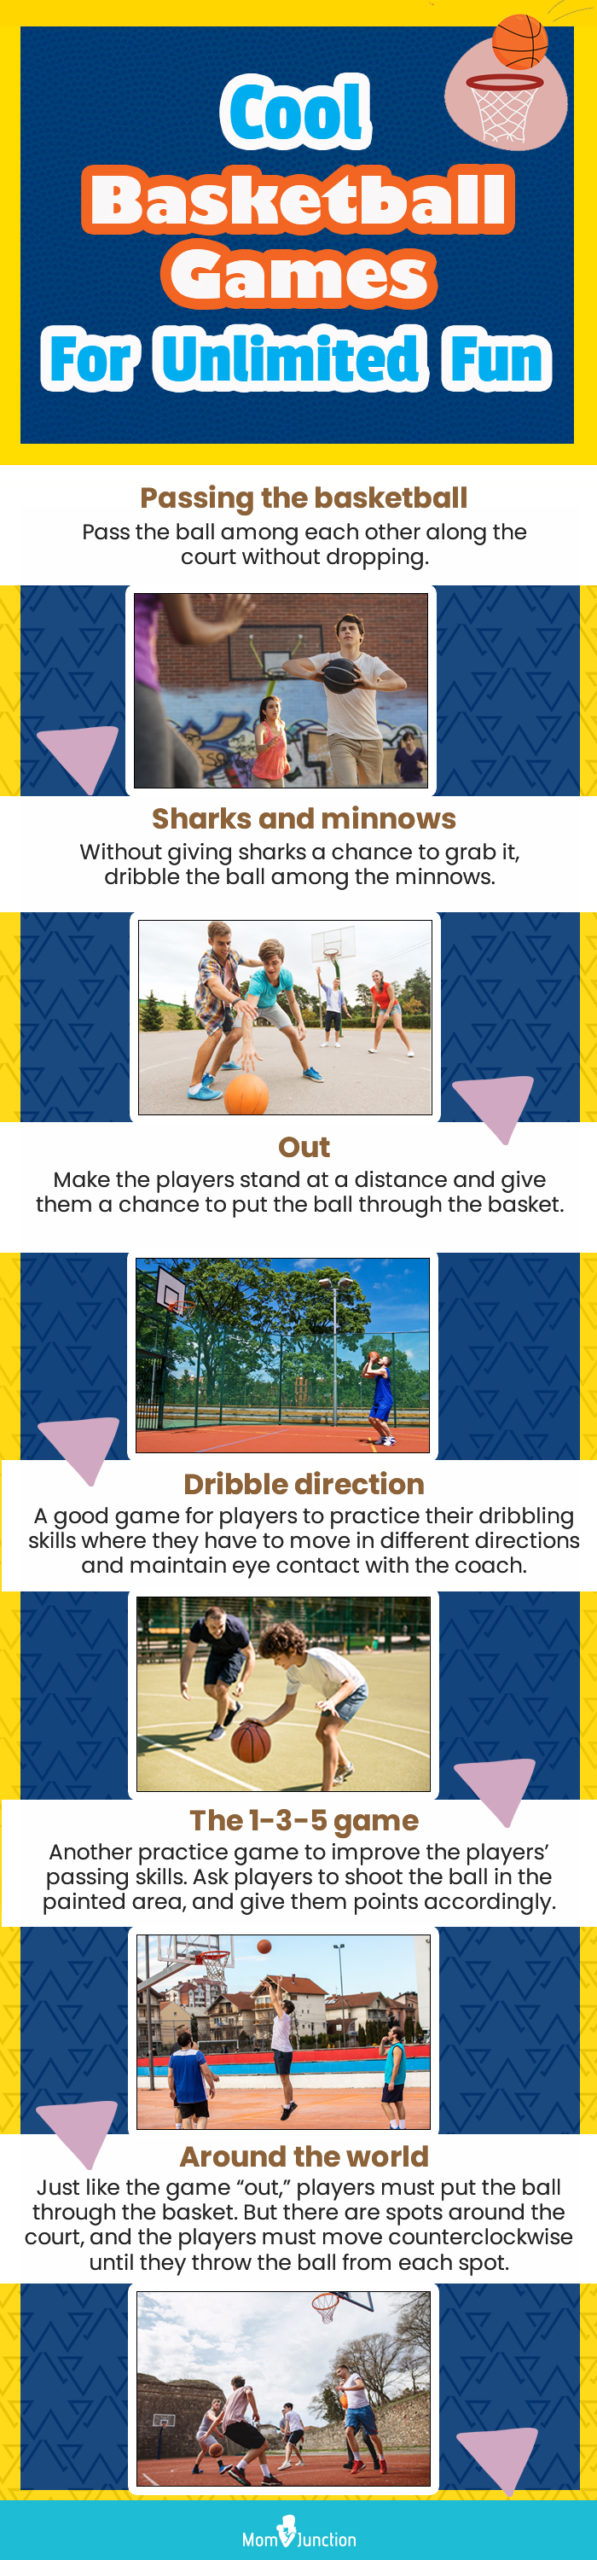 cool basketball games for unlimited fun (infographic)